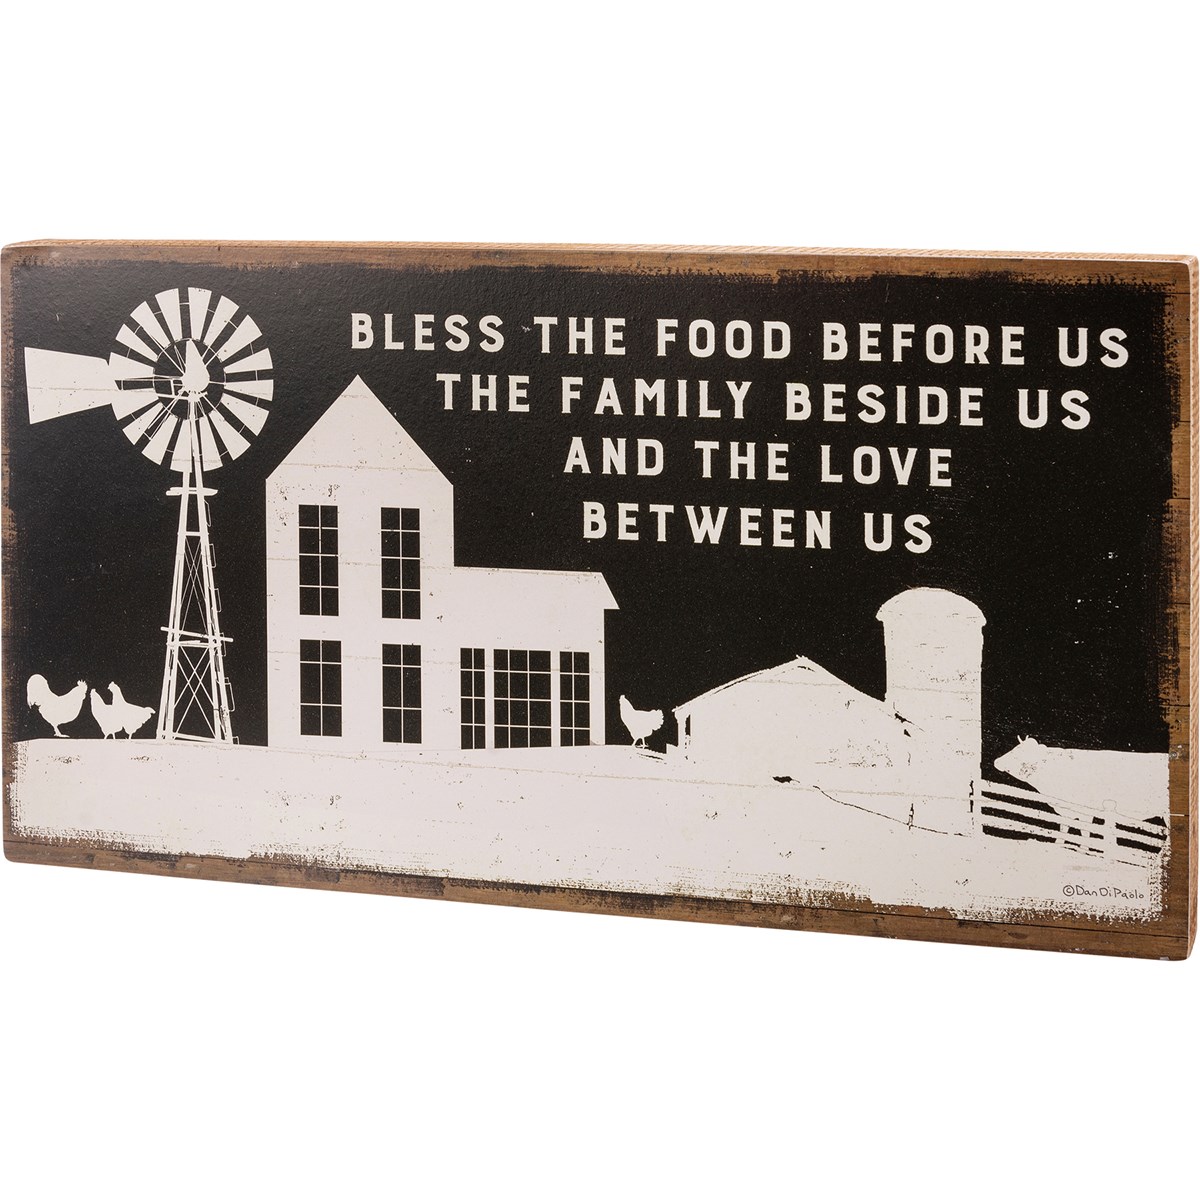 Bless The Food Before Us Box Sign - Wood, Paper